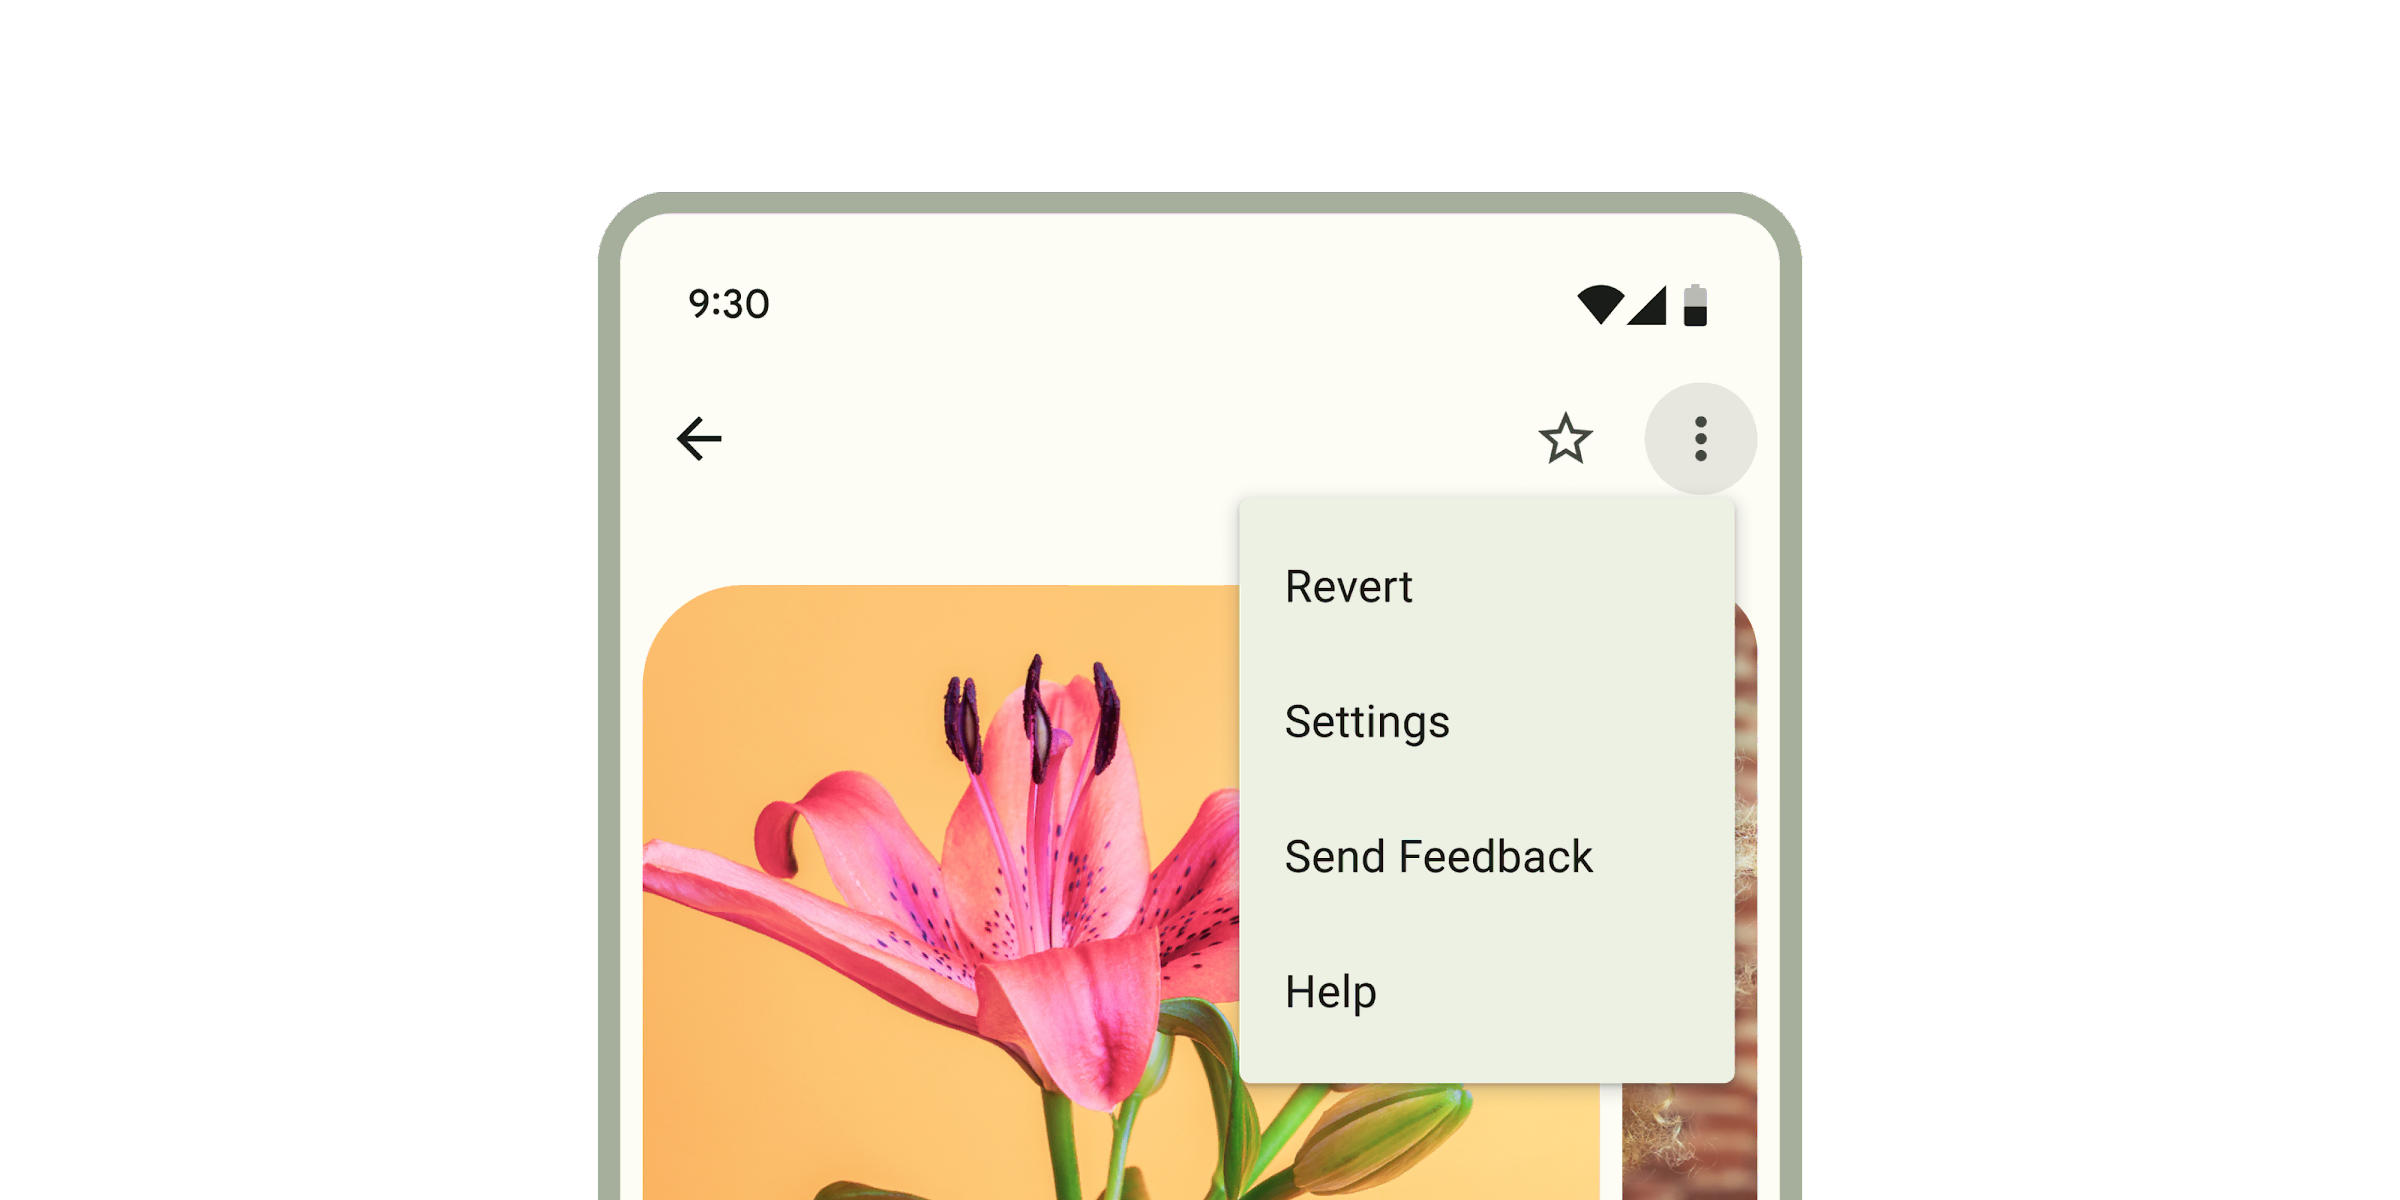 A phone showing a vertical threedot, pressed, icon button and a menu floating below it with the following visible items: Revert, Settings, and Send Feedback